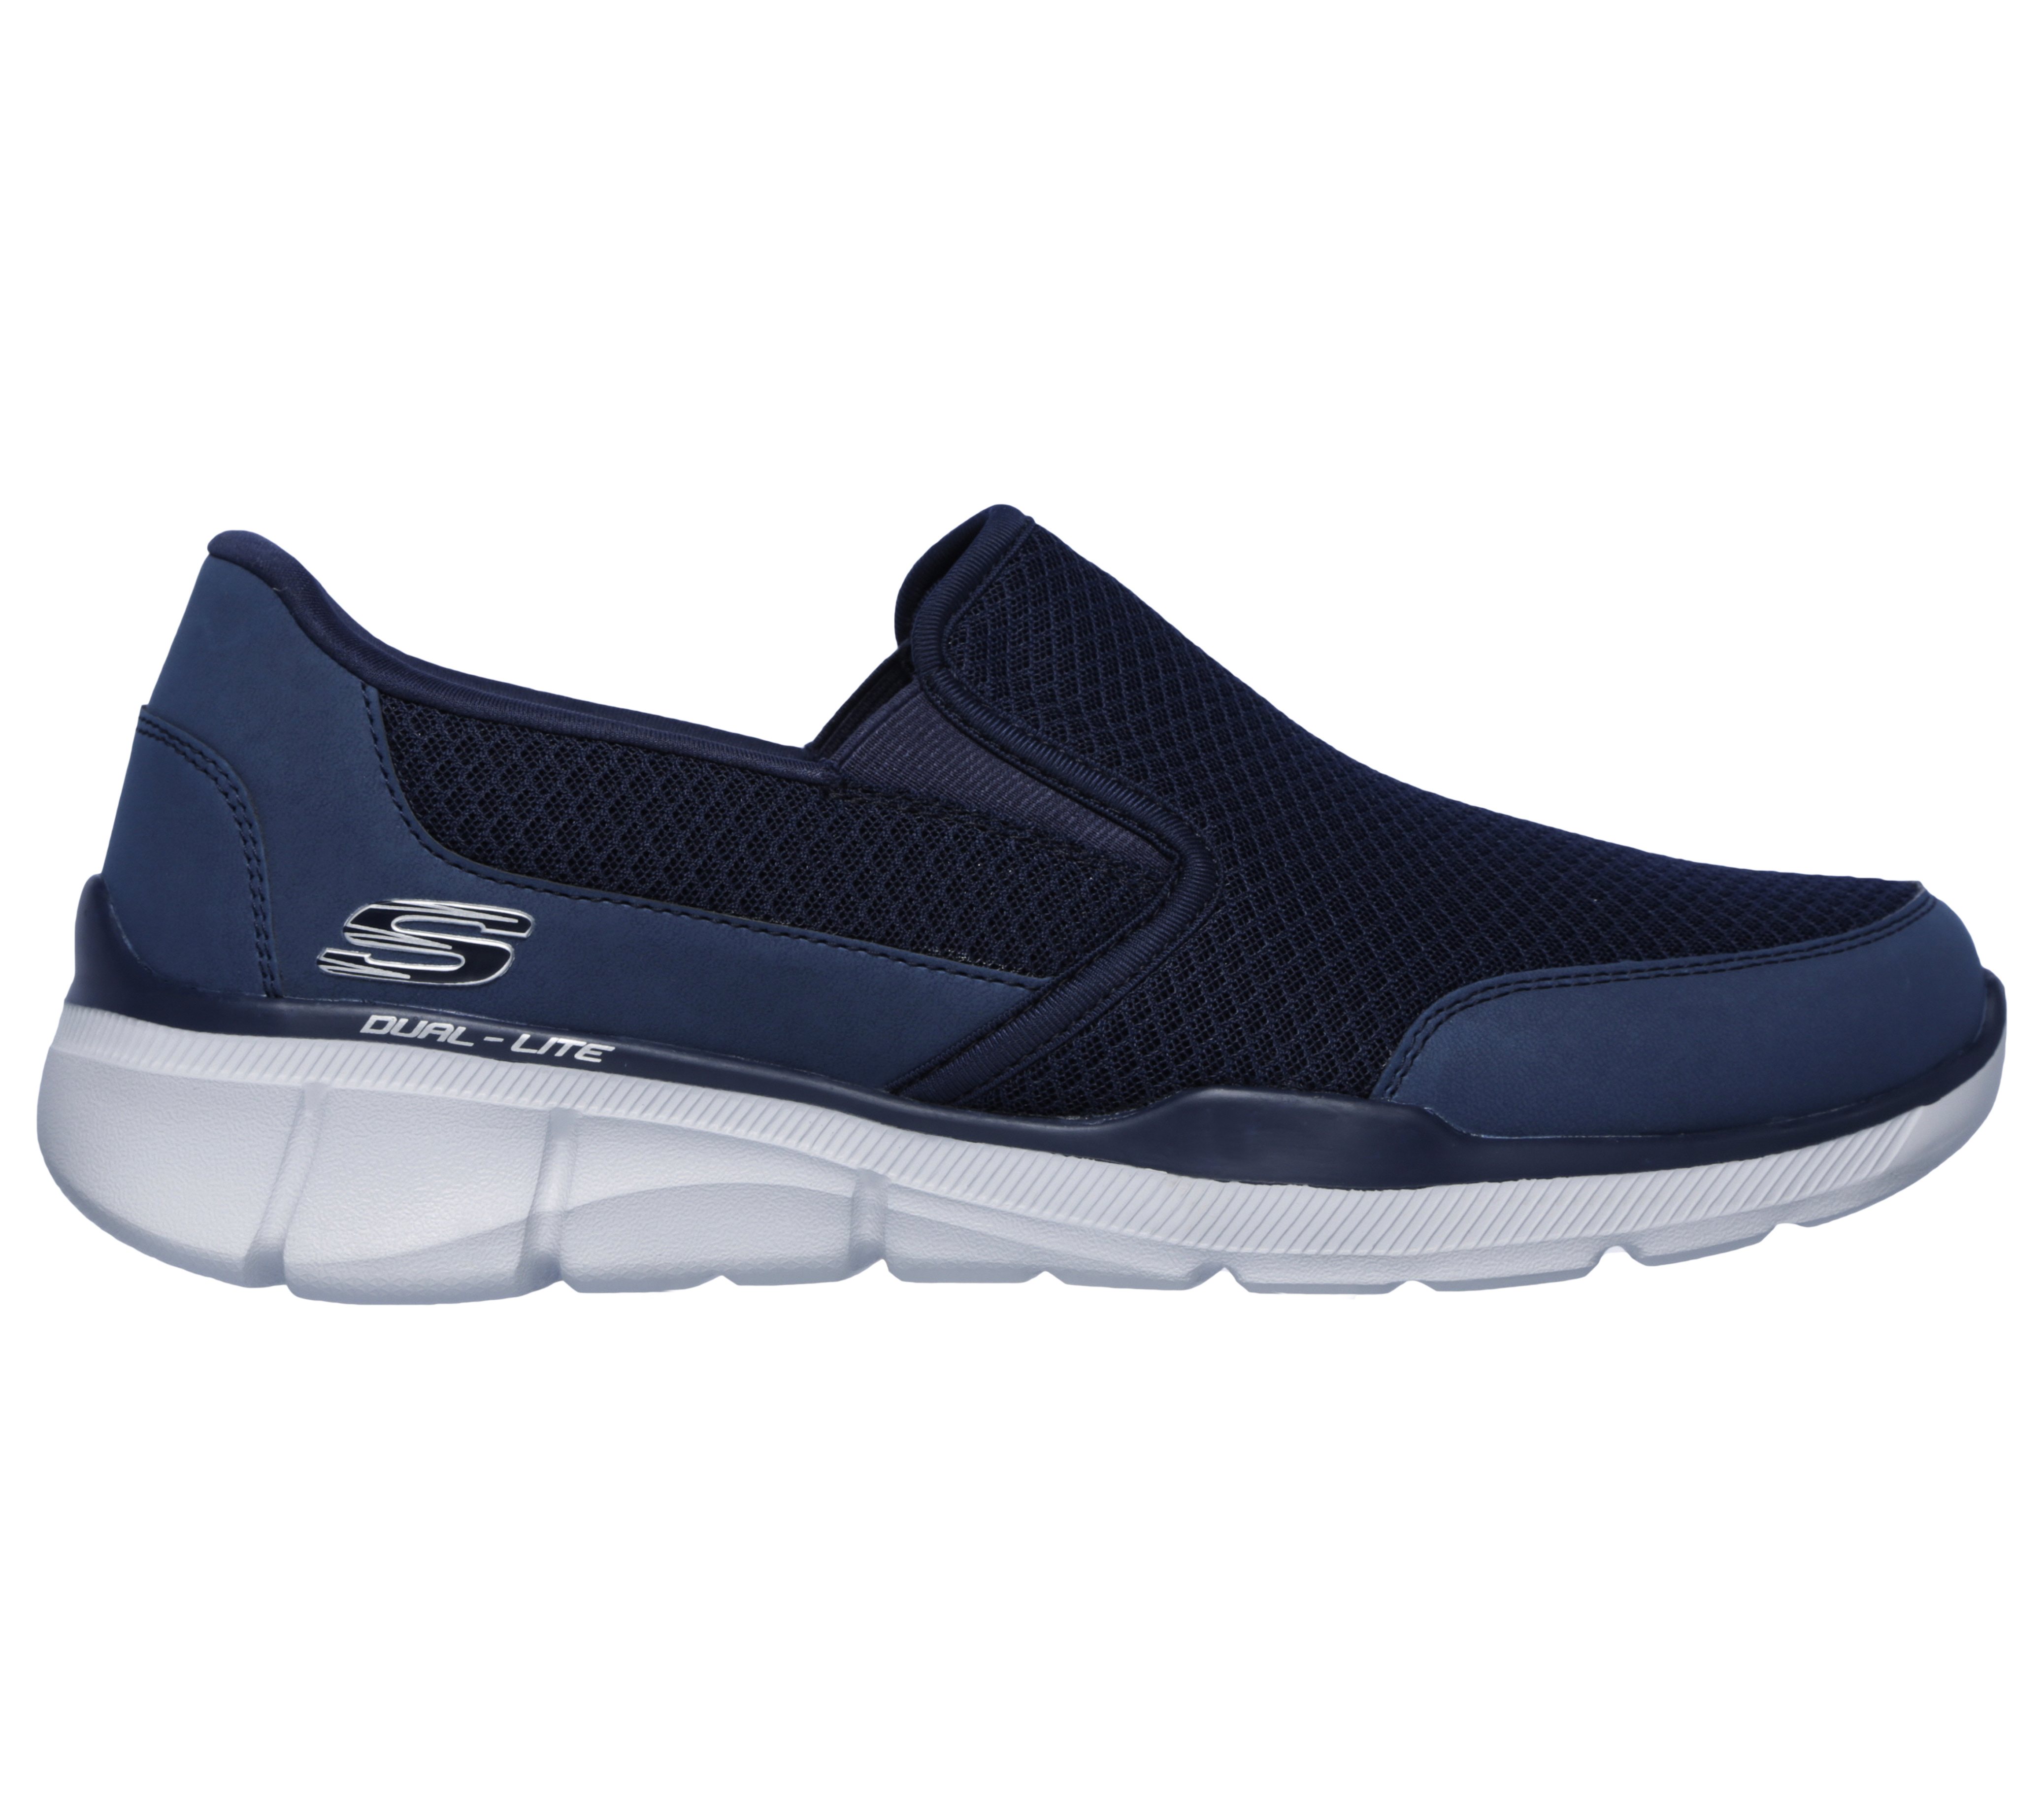 skechers relaxed fit dual lite